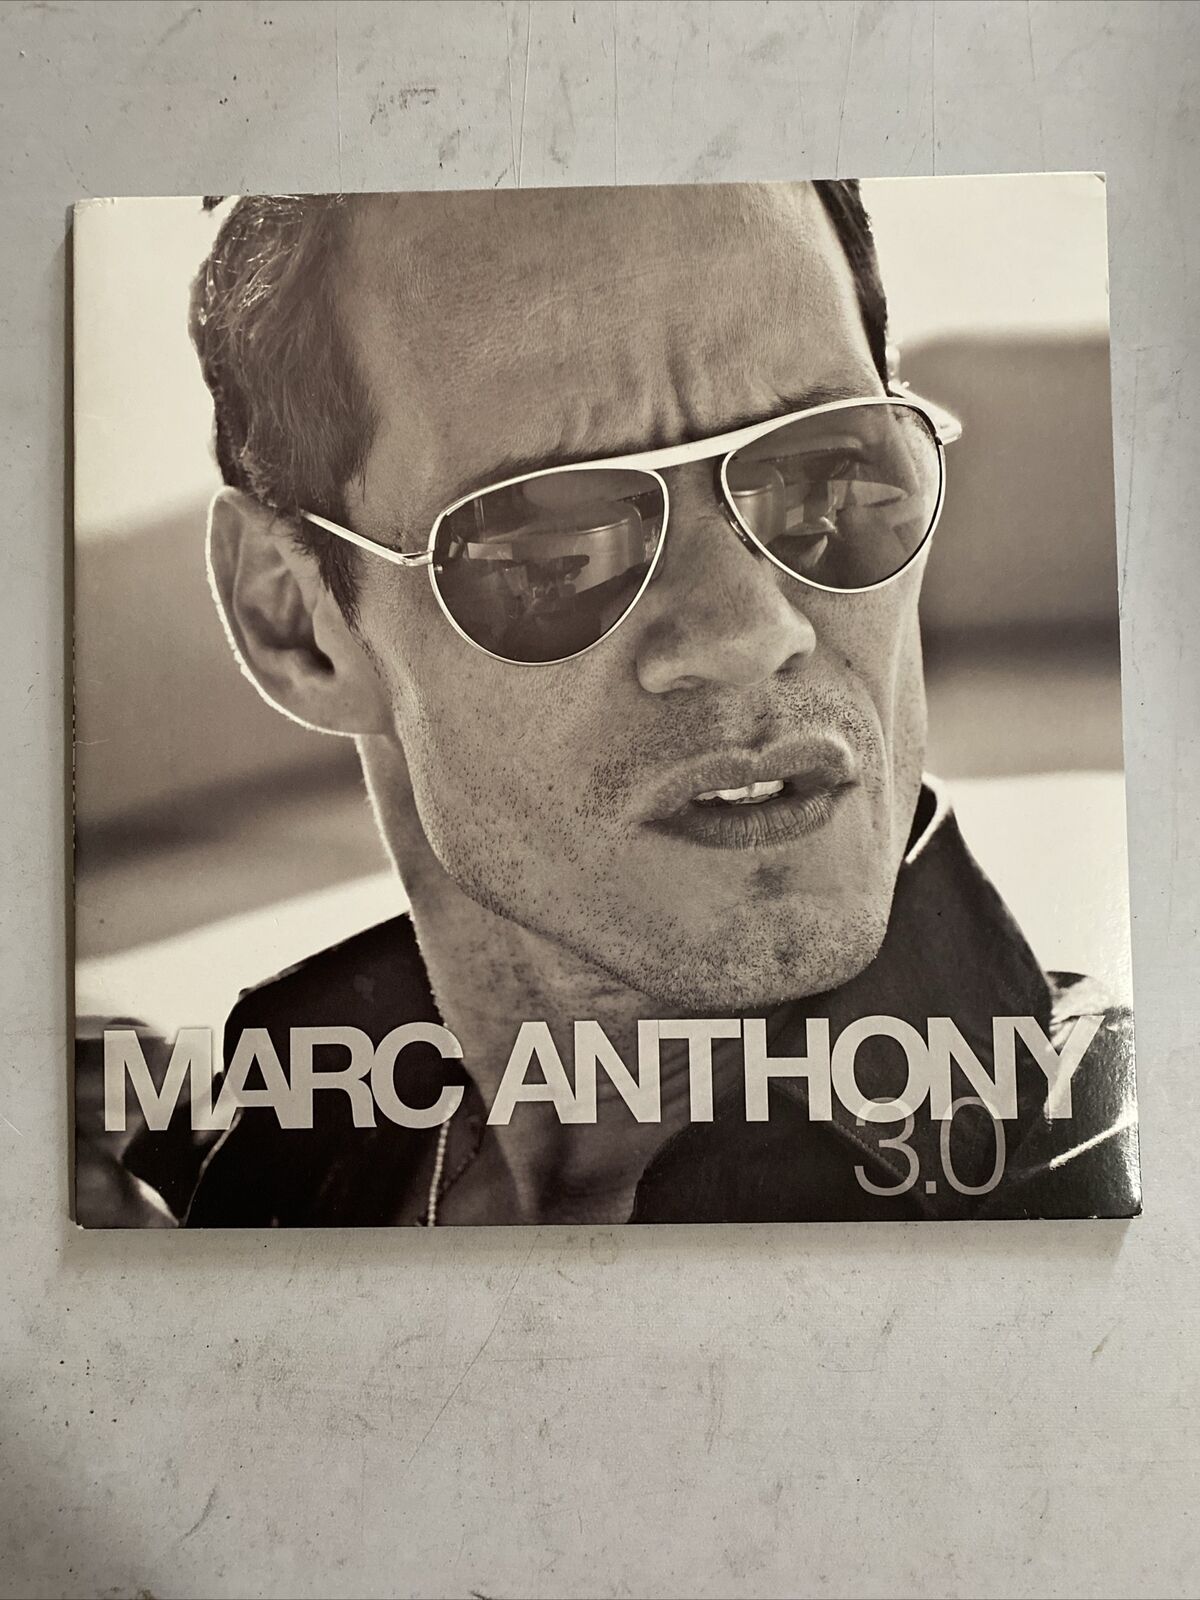 Marc Anthony – 3.0 by Marc Anthony (Marbled Vinyl, 2021, Sony Recordings)